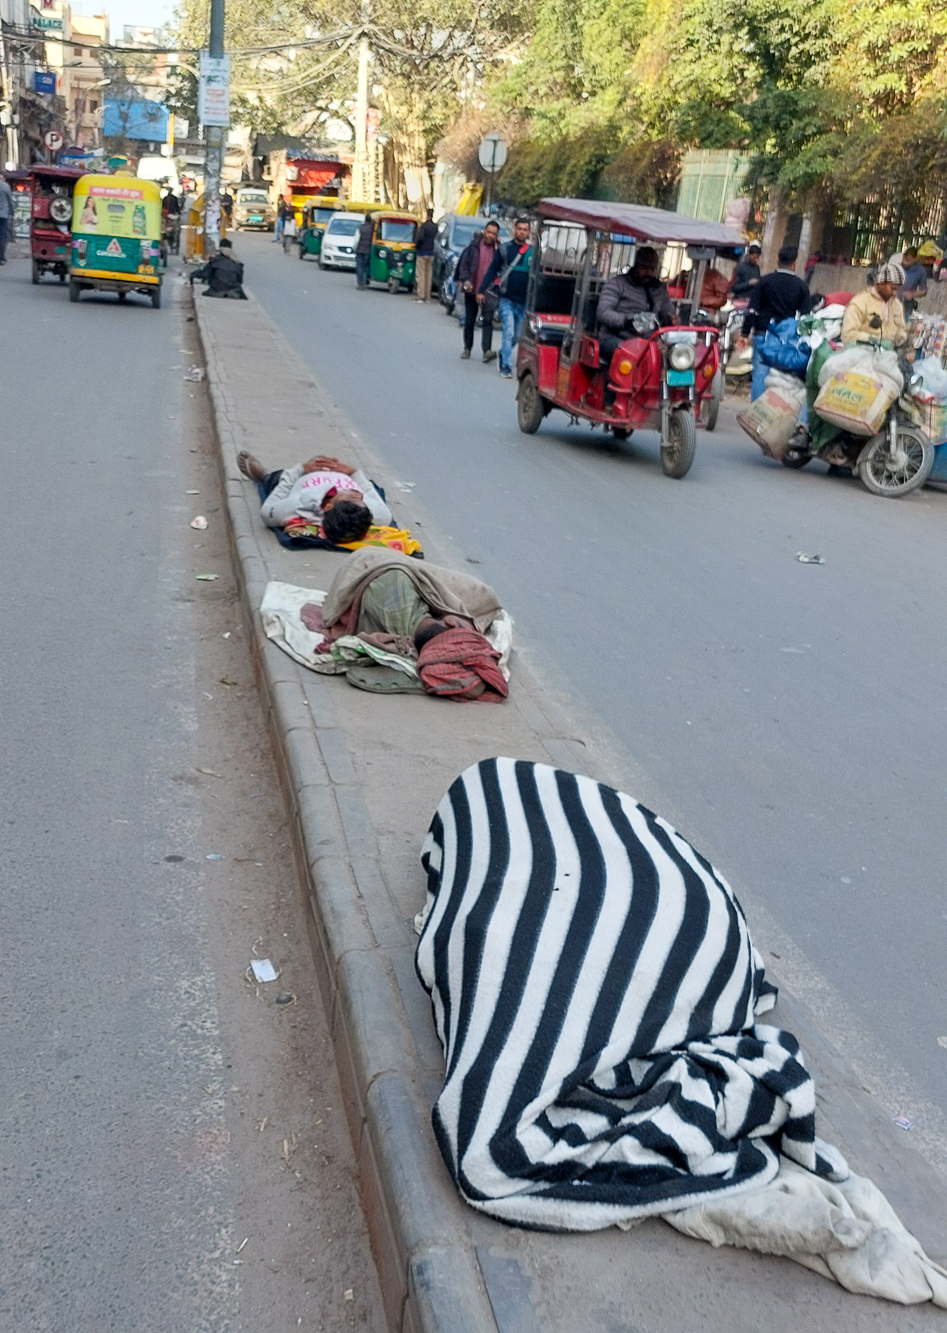 <span  class="uc_style_uc_tiles_grid_image_elementor_uc_items_attribute_title" style="color:#ffffff;">people sleeping on the streets of Delhi</span>